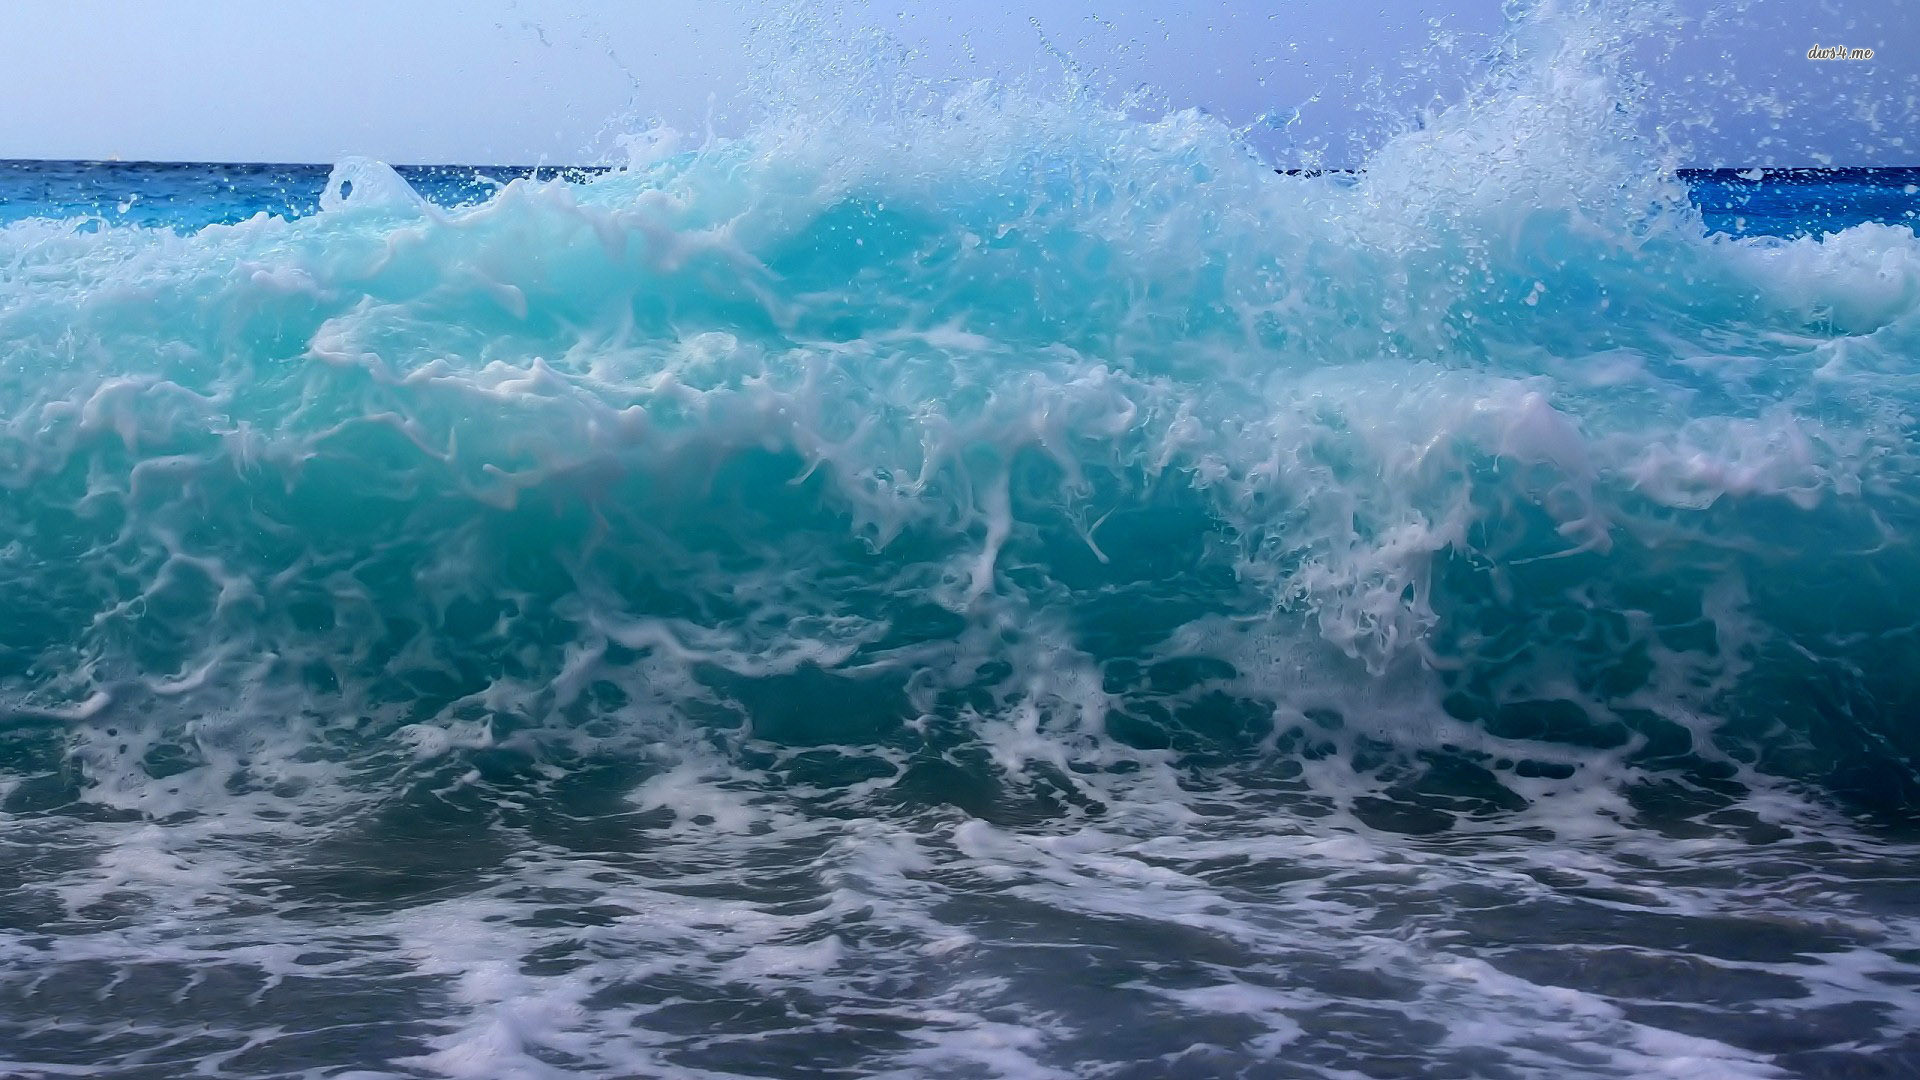 Beach Waves Wallpapers for Desktop (55+ images)